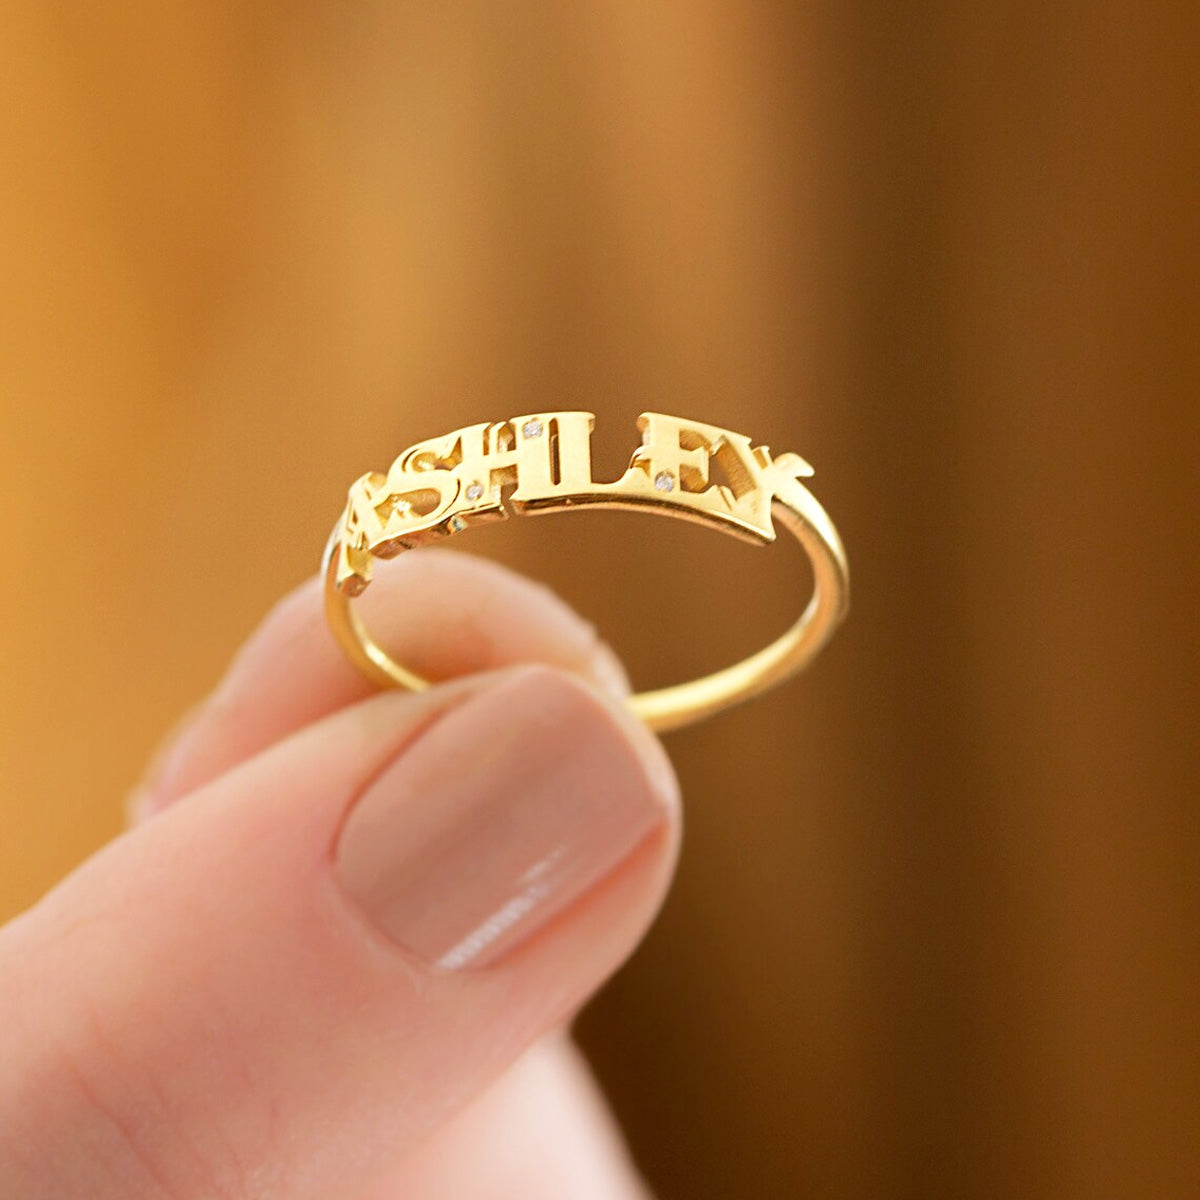 Custom Name Ring Personalized Jewelry for Women - 14K Solid Gold